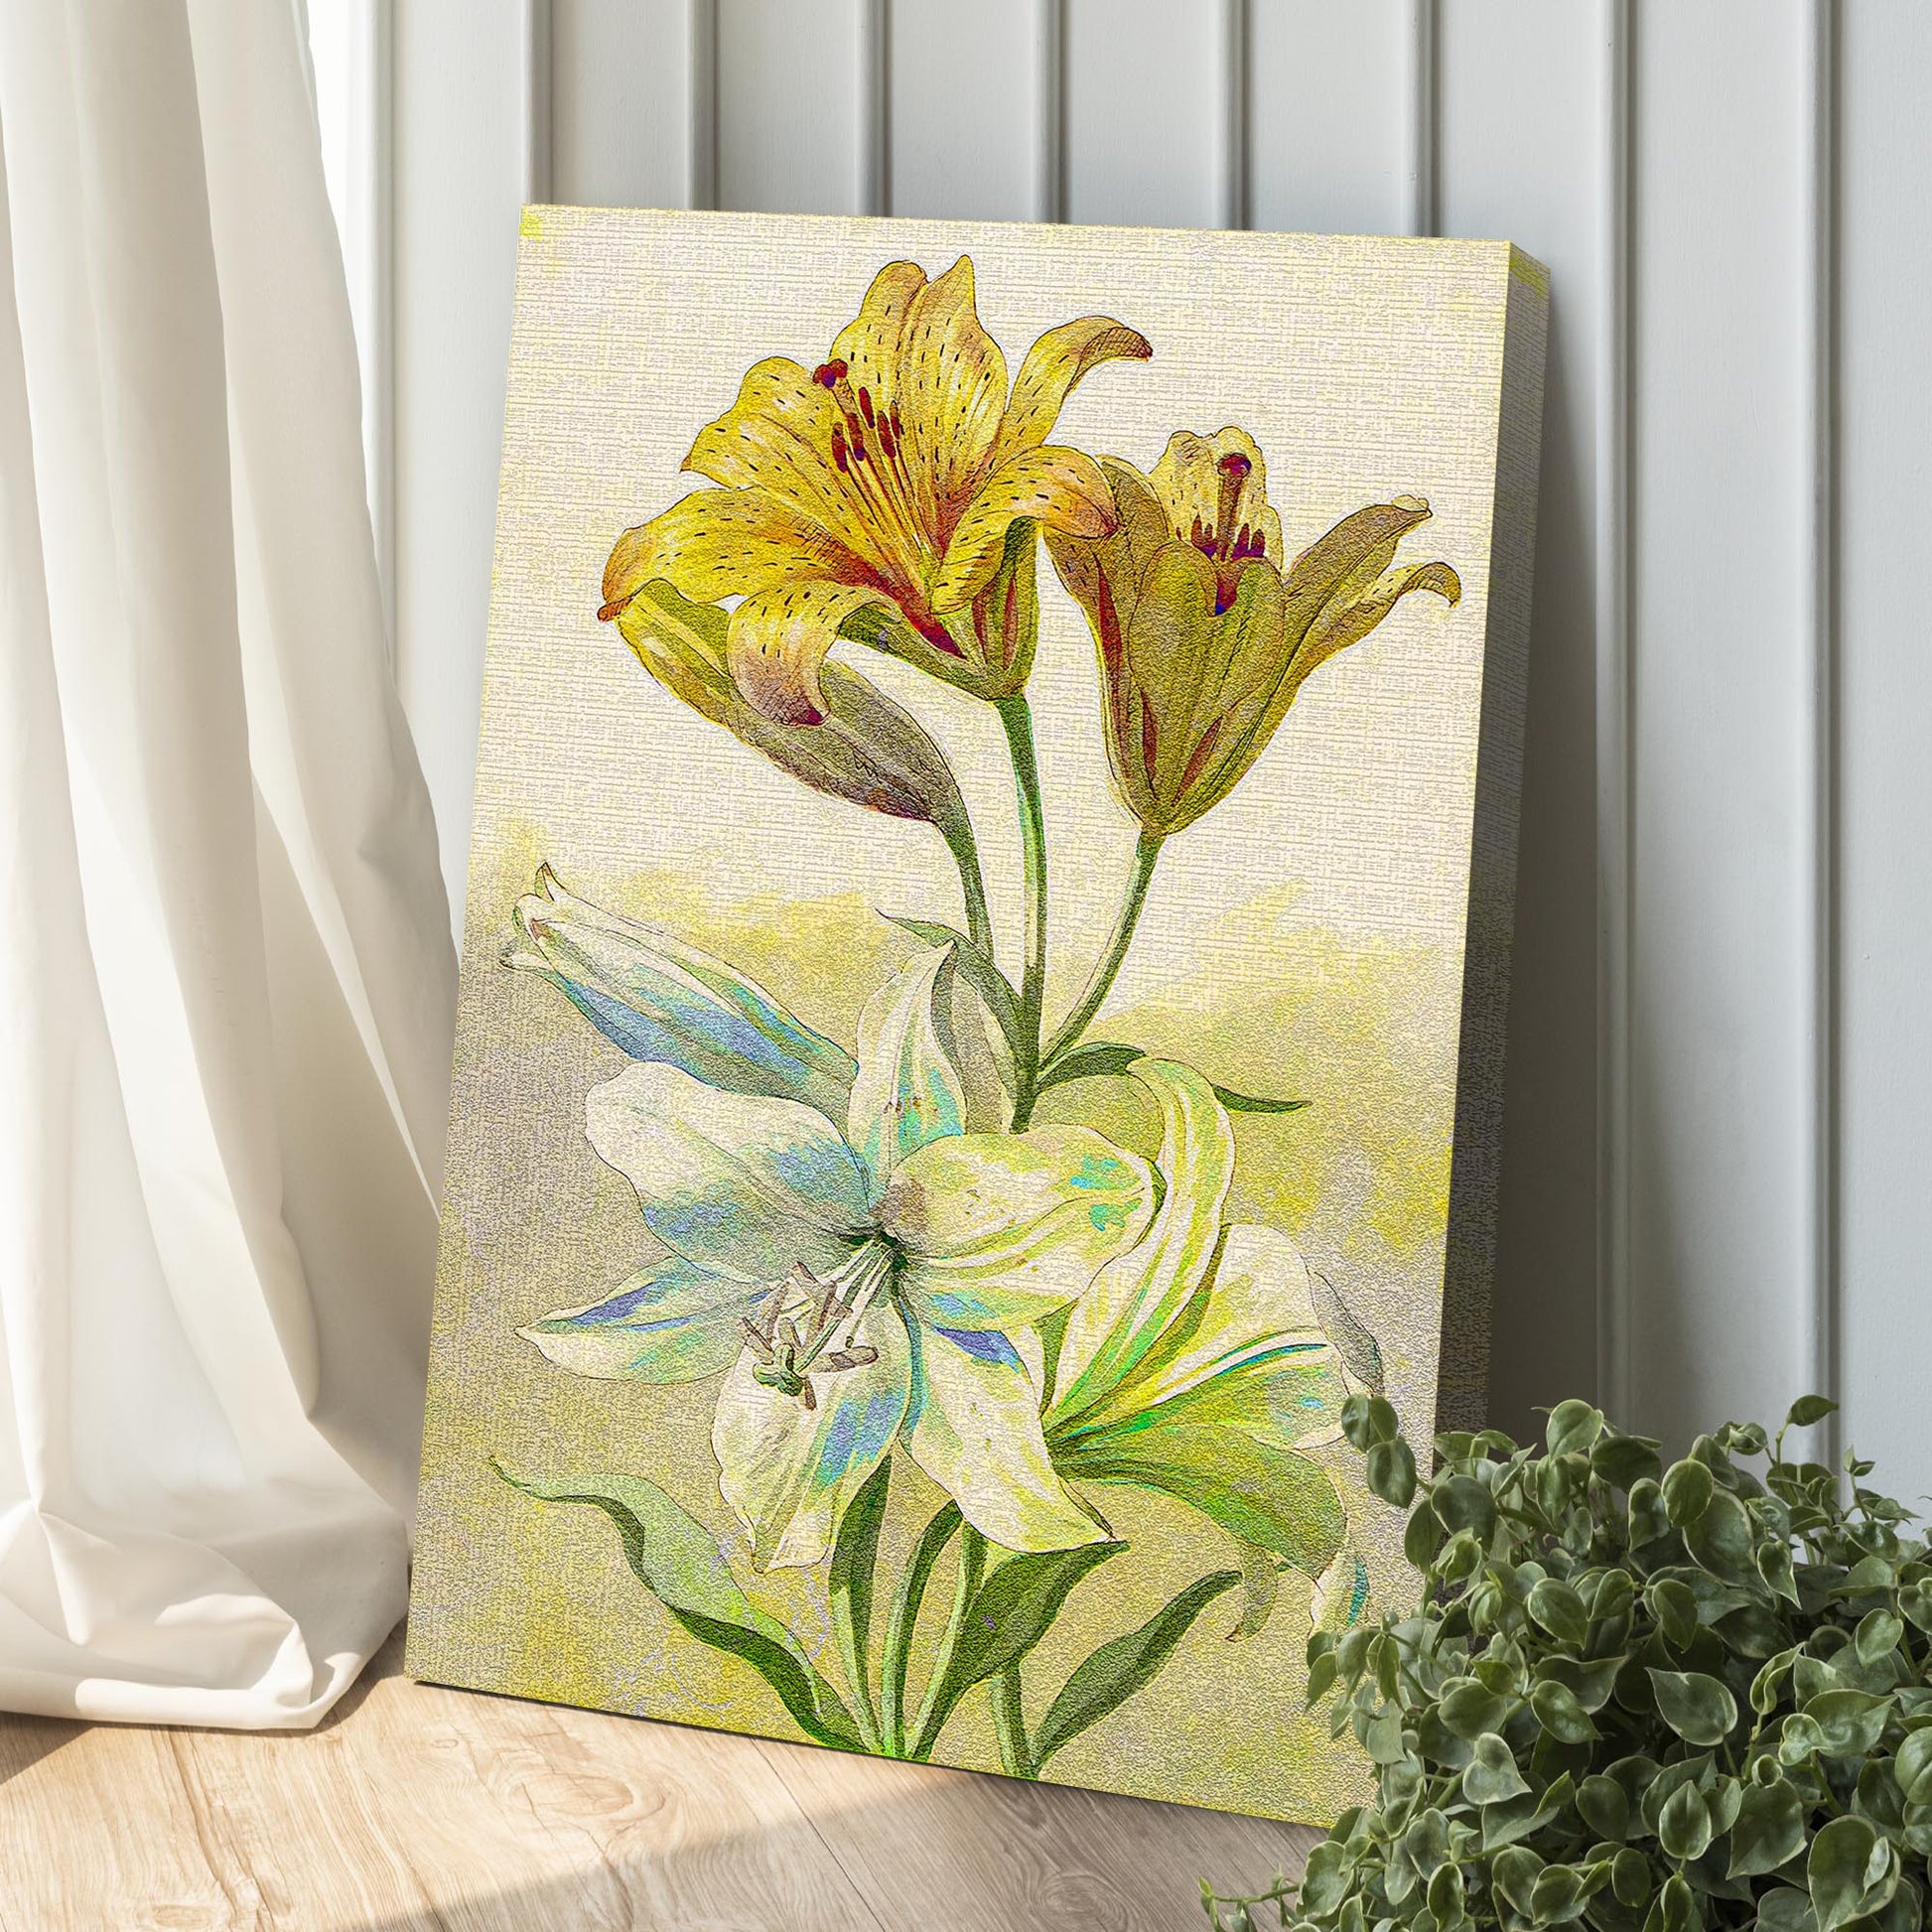 Flowers Daffodils Vintage Canvas Wall Art Style 2 - Image by Tailored Canvases